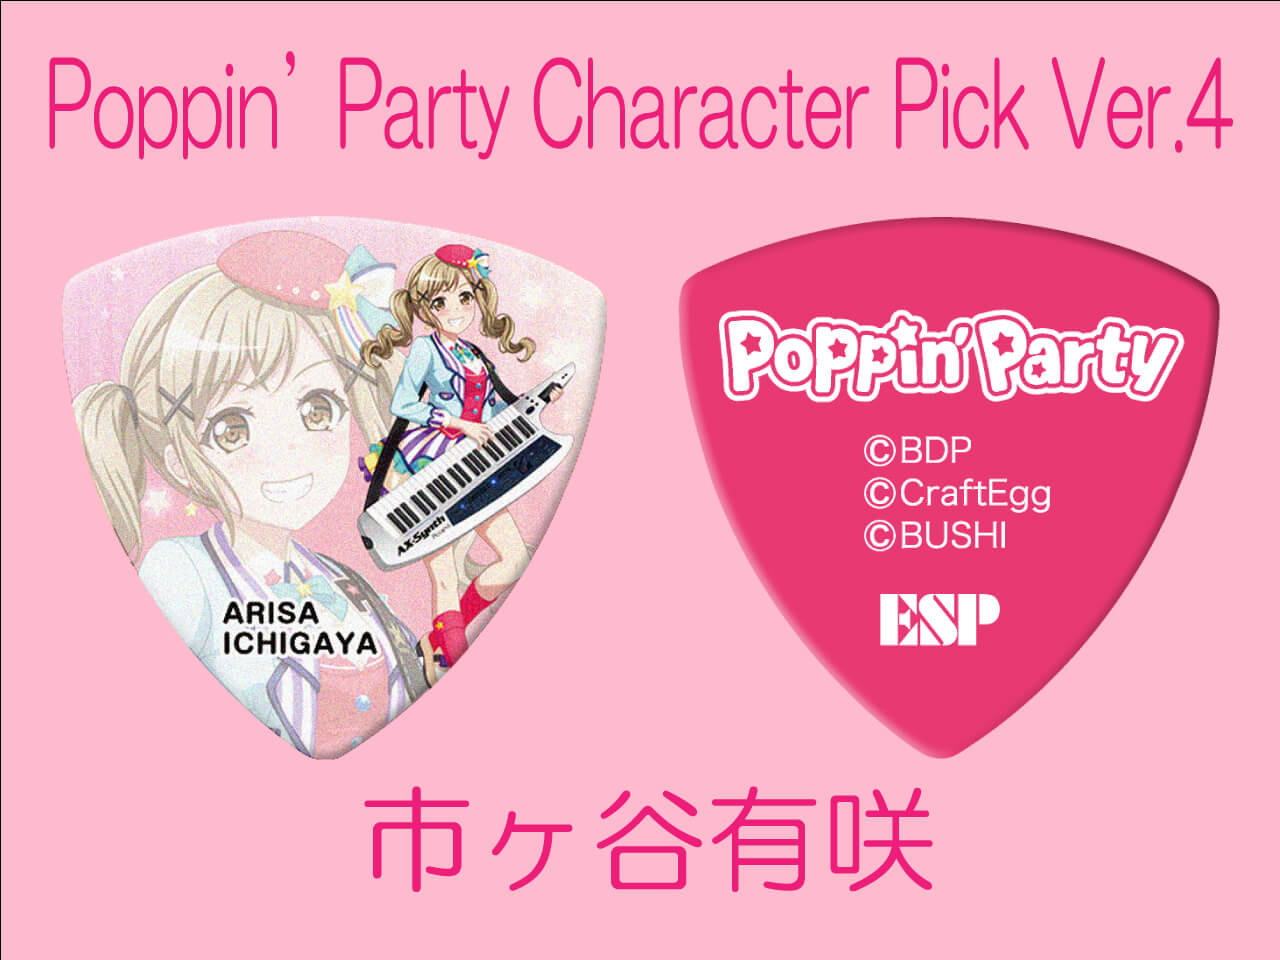 【ESP×BanG Dream!コラボピック】Poppin’Party Character Pick Ver.4 "市ヶ谷有咲"10枚セット（GBP Arisa Poppin Party 4）